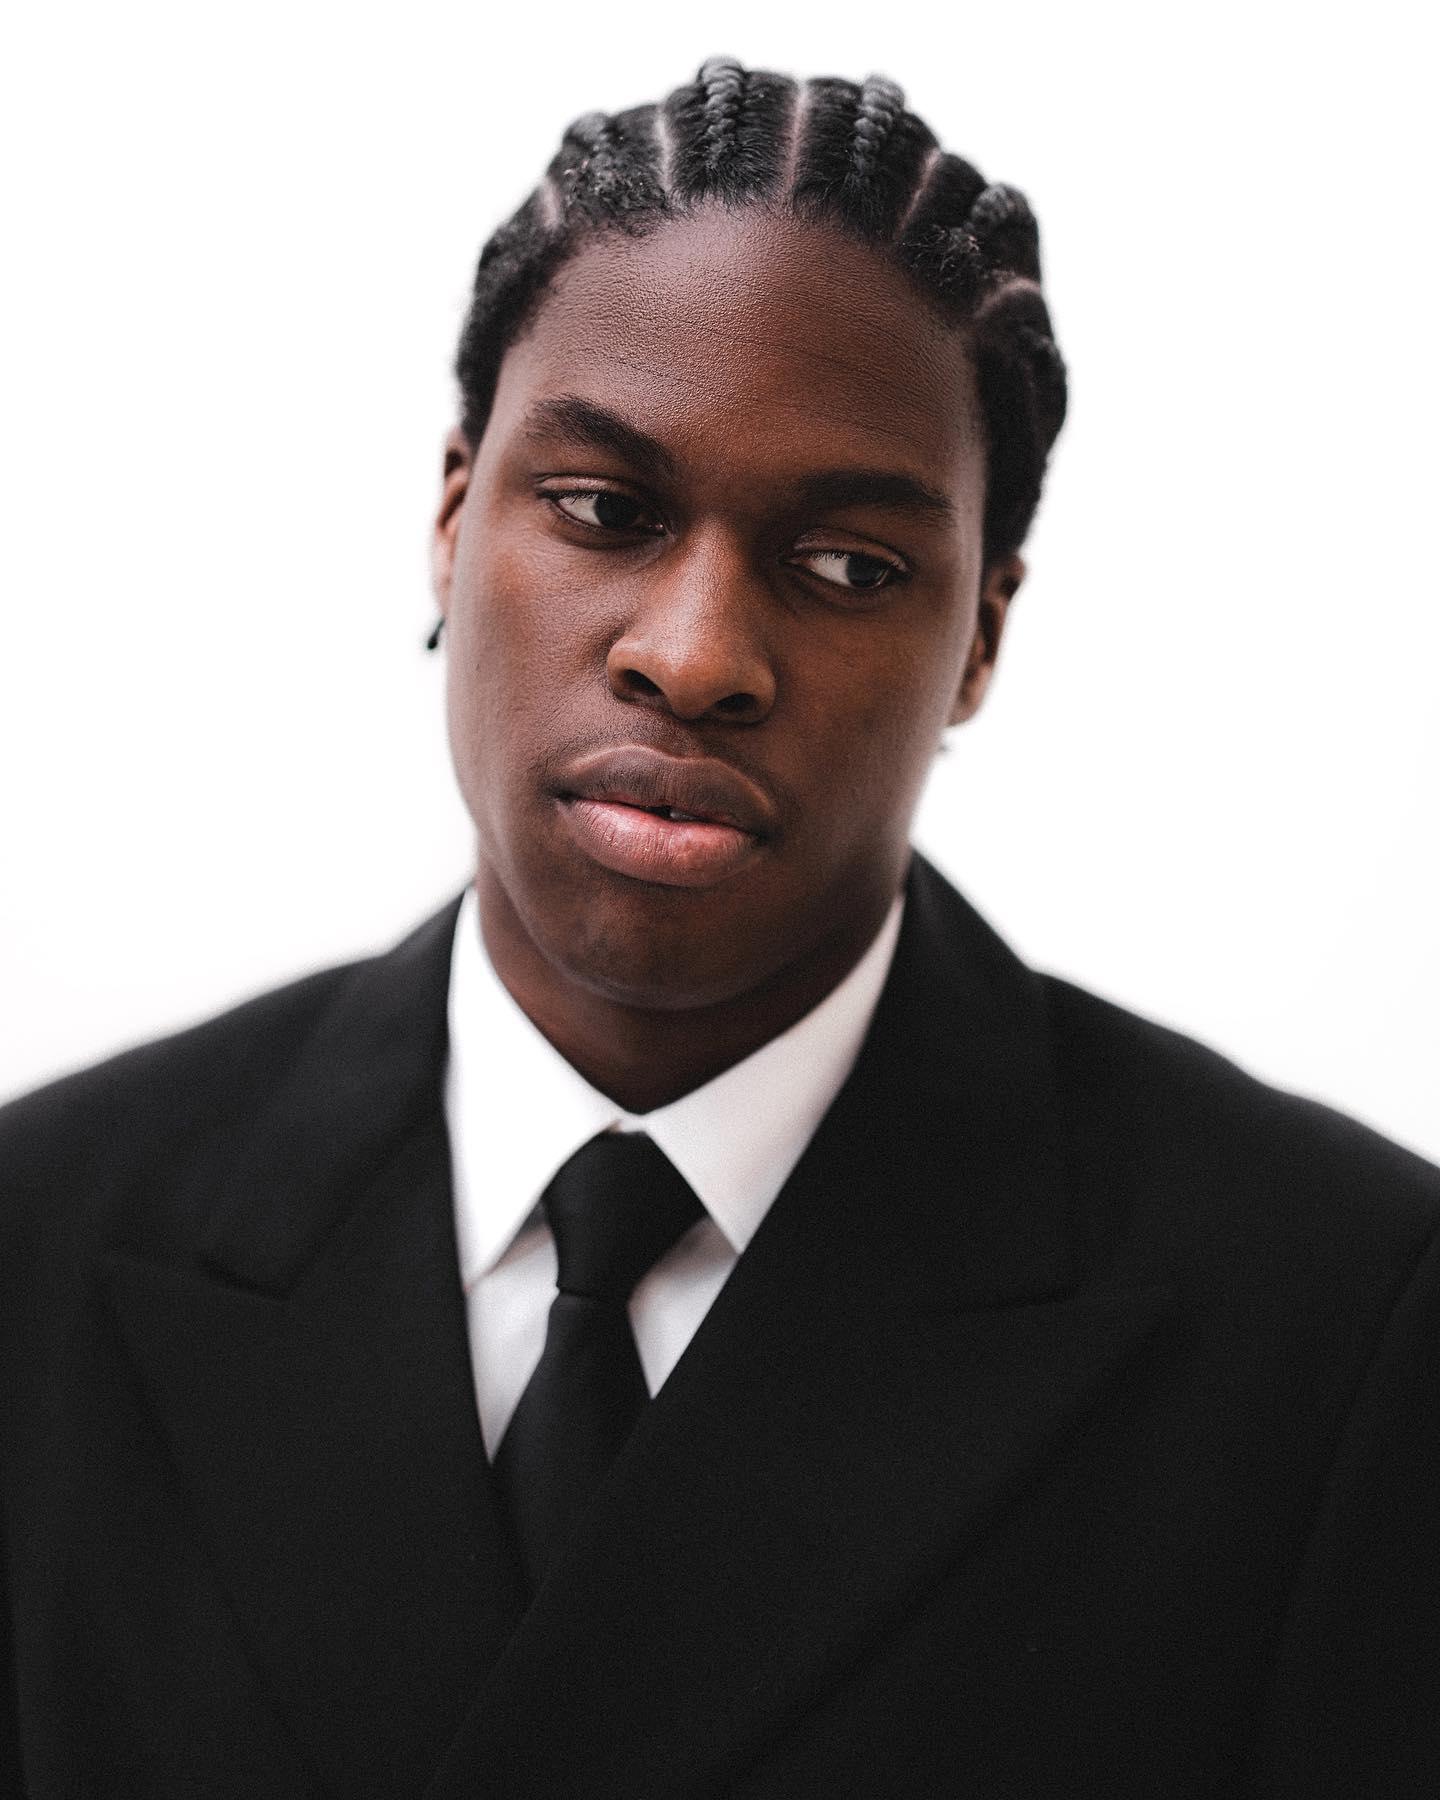 Daniel Caesar To Visit Manila for the Asia Leg of the ‘Superpowers’ World Tour